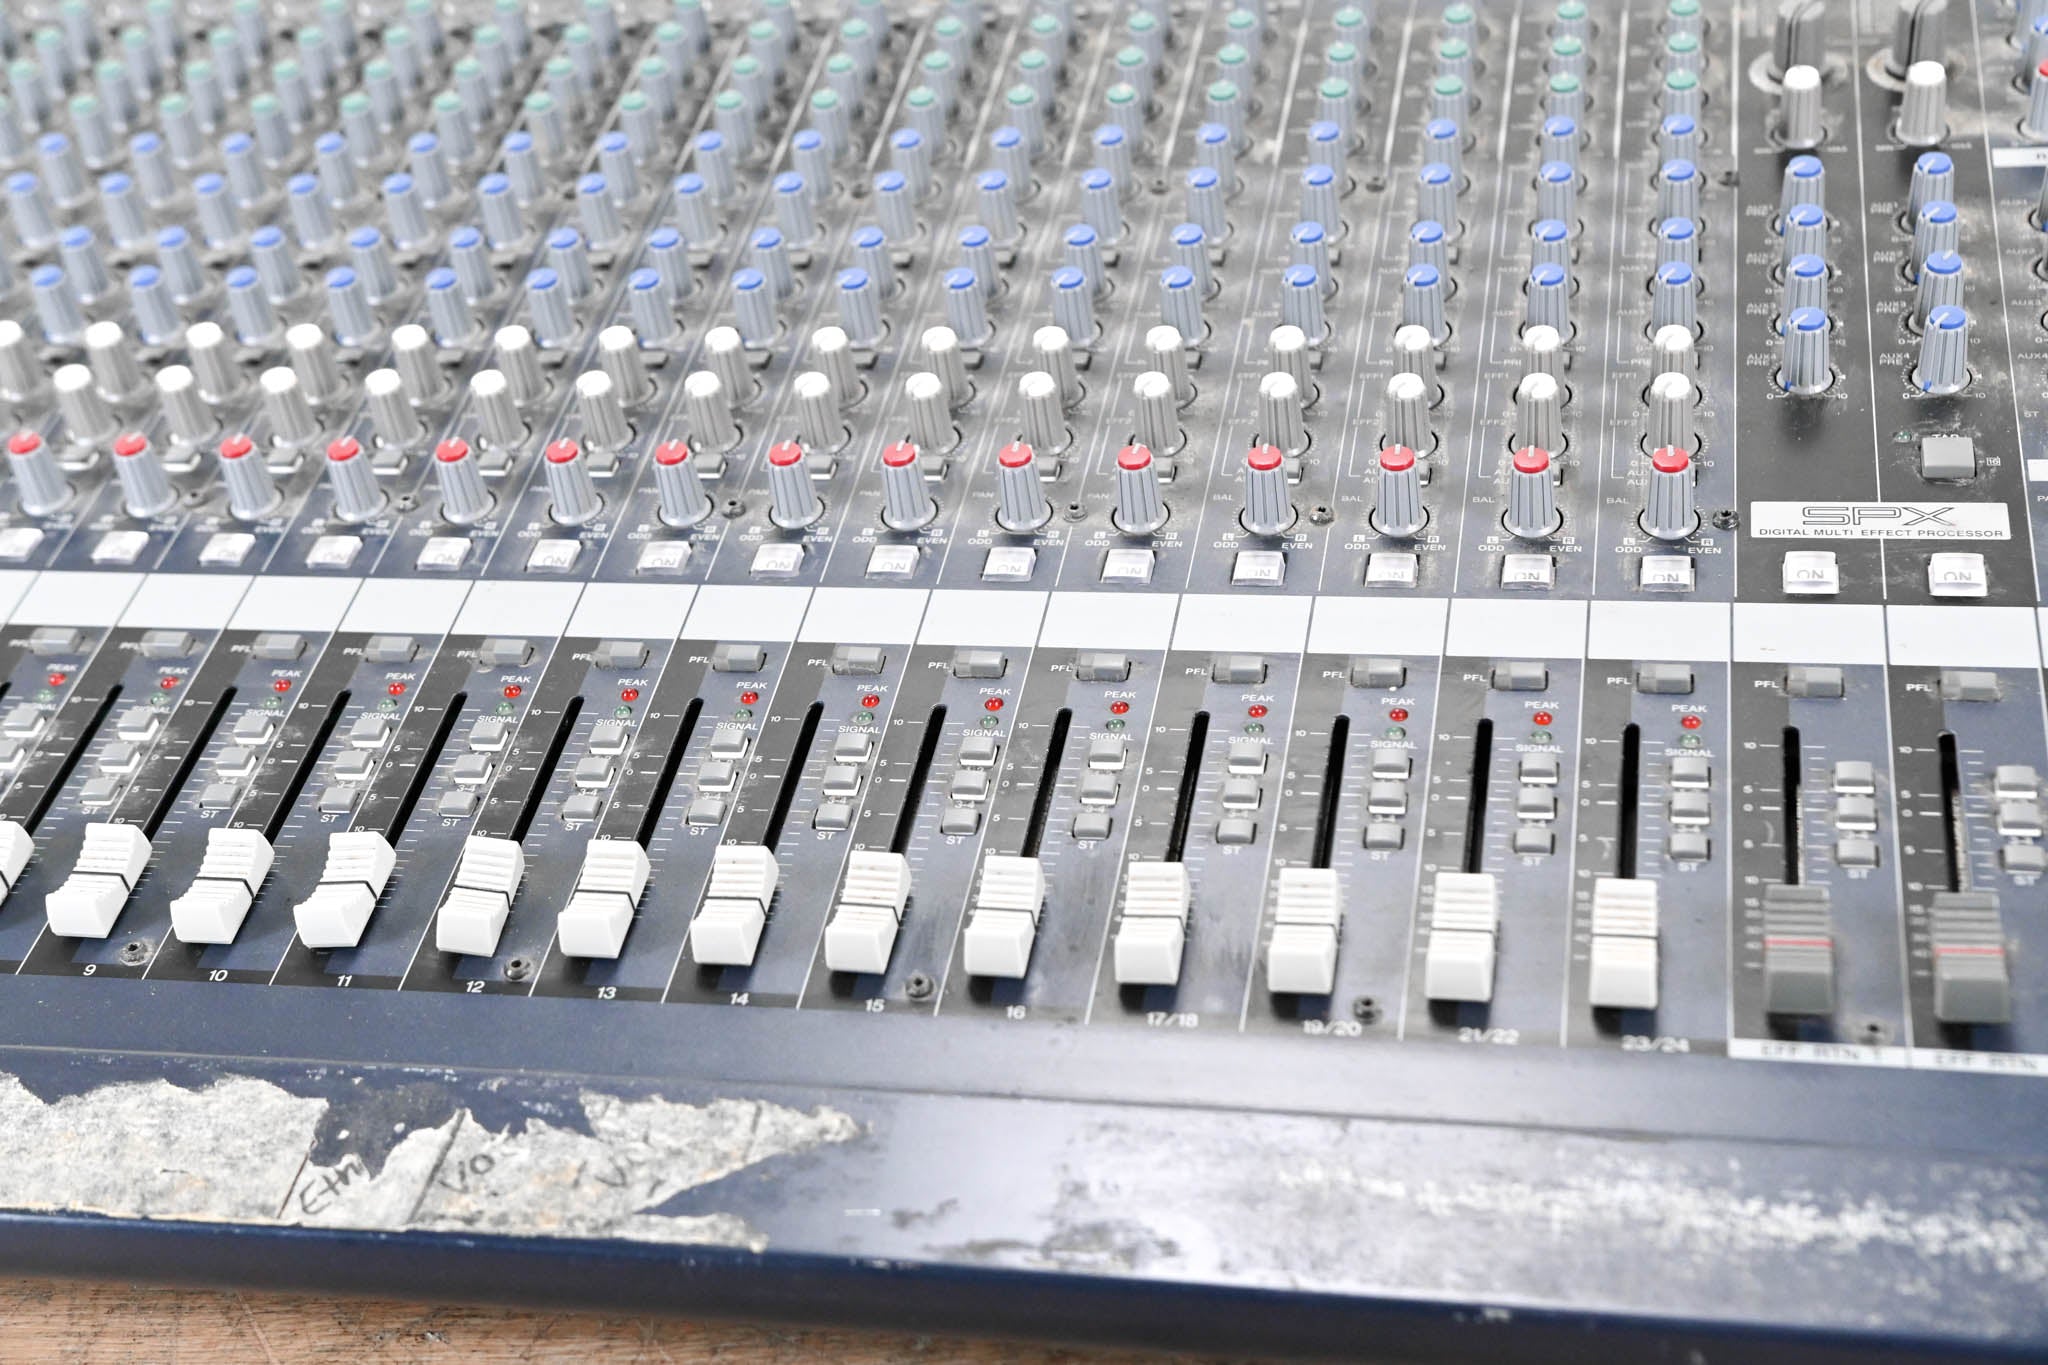 Yamaha MG24/14FX 24-Input 14-Bus Mixing Console with Effects